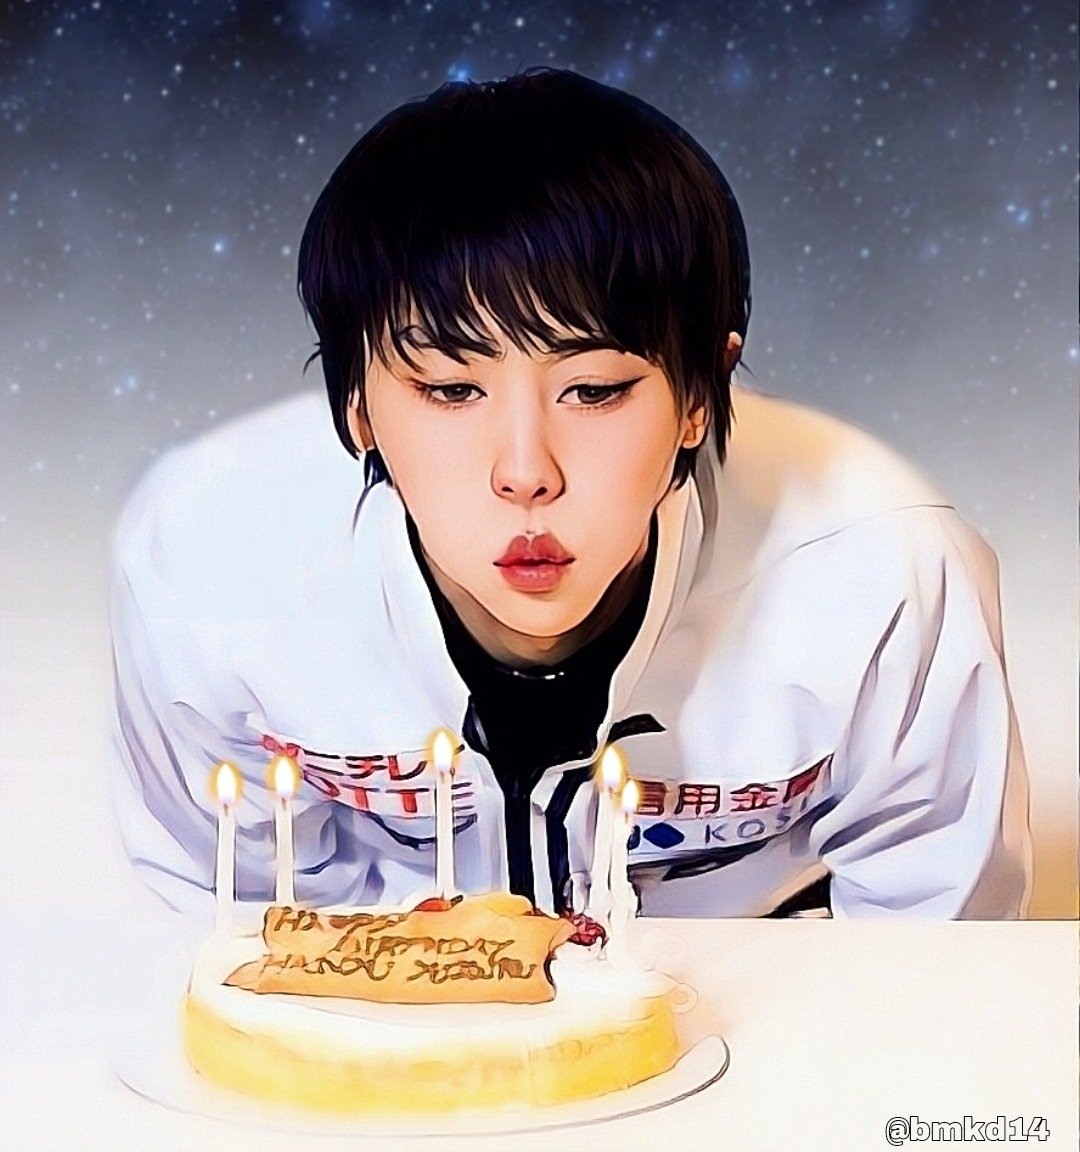 Happy birthday, my legend. I wish you a year full of health, success and happiness. Every year, you are a source of joy for your fans all over the world. 🎂♡

 #YuzuruHanyu𓃵 #HANYUYUZURU𓃵
#Happy29thBirthdayYuzu  
#ゆづHAPPYBIRTHDAY2023 
#羽生結弦誕生祭2023